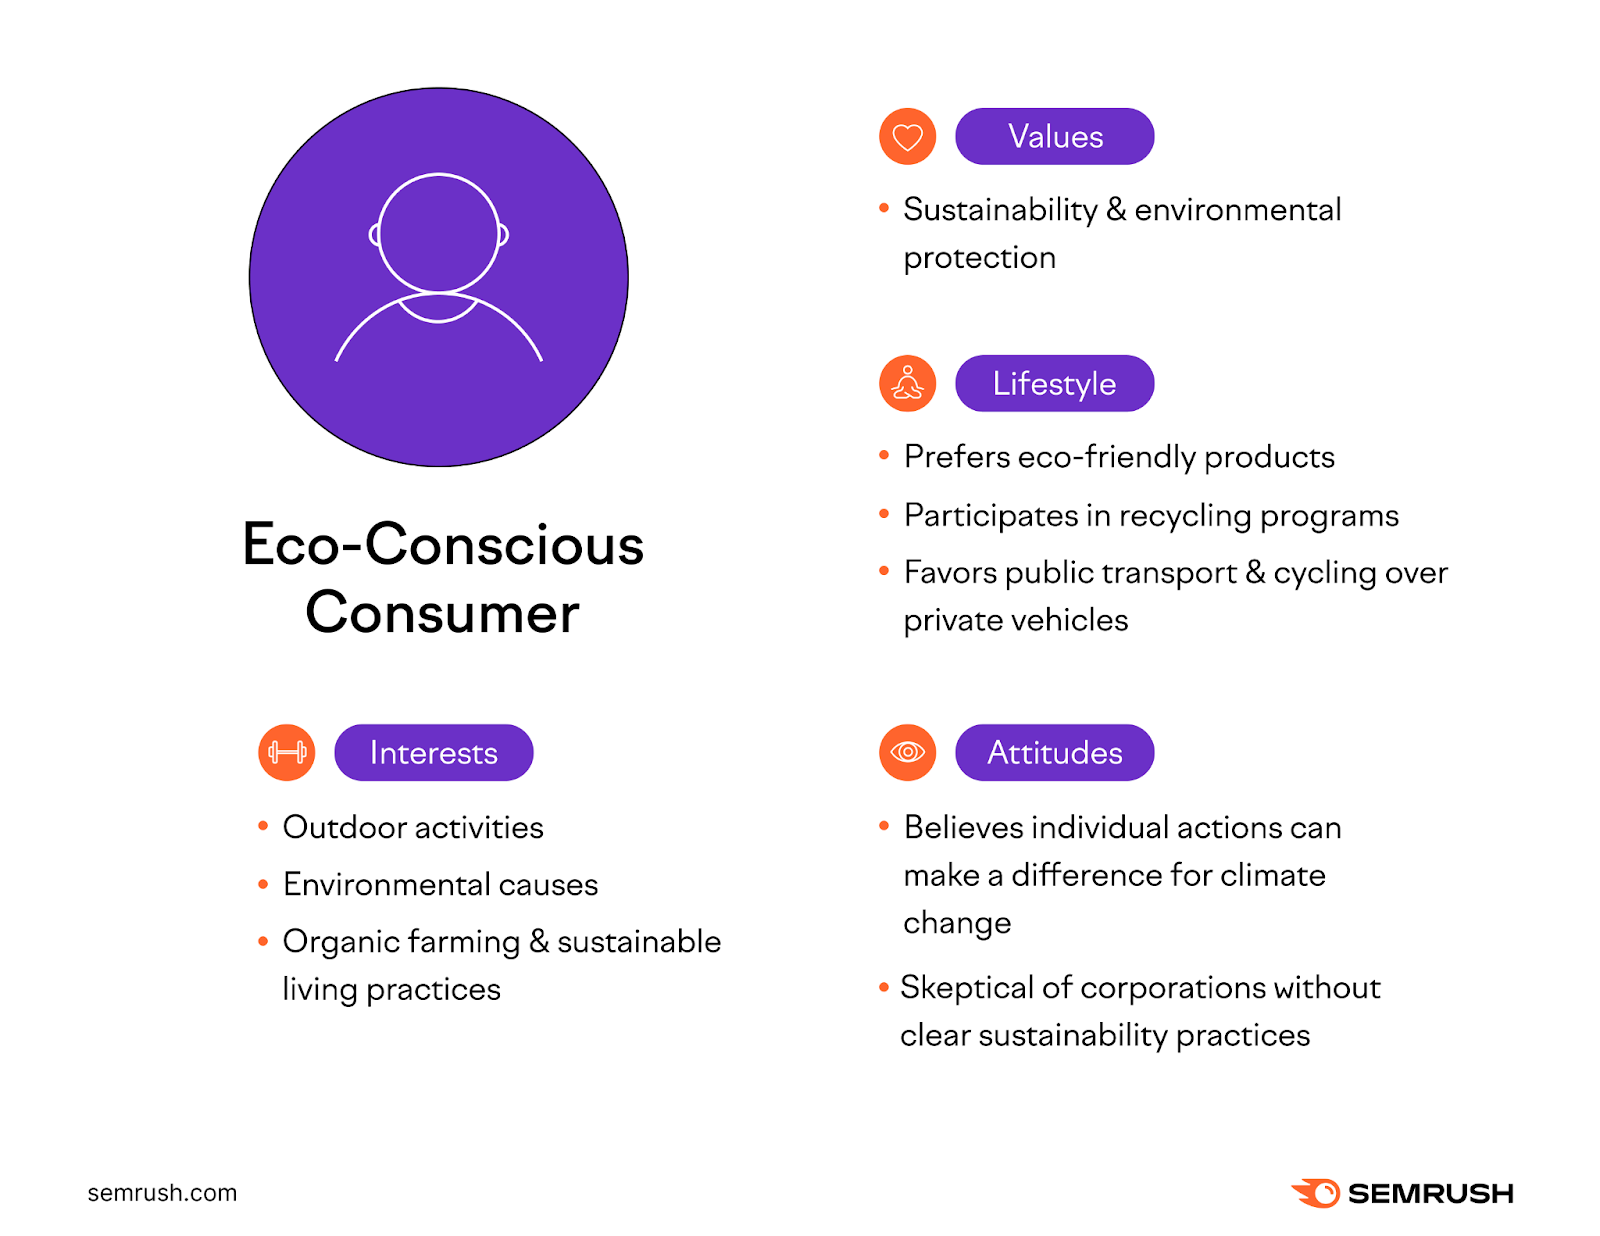 An overview of interests, values, lifestyle, and attitudes of “Eco-Conscious Consumer” buyer persona